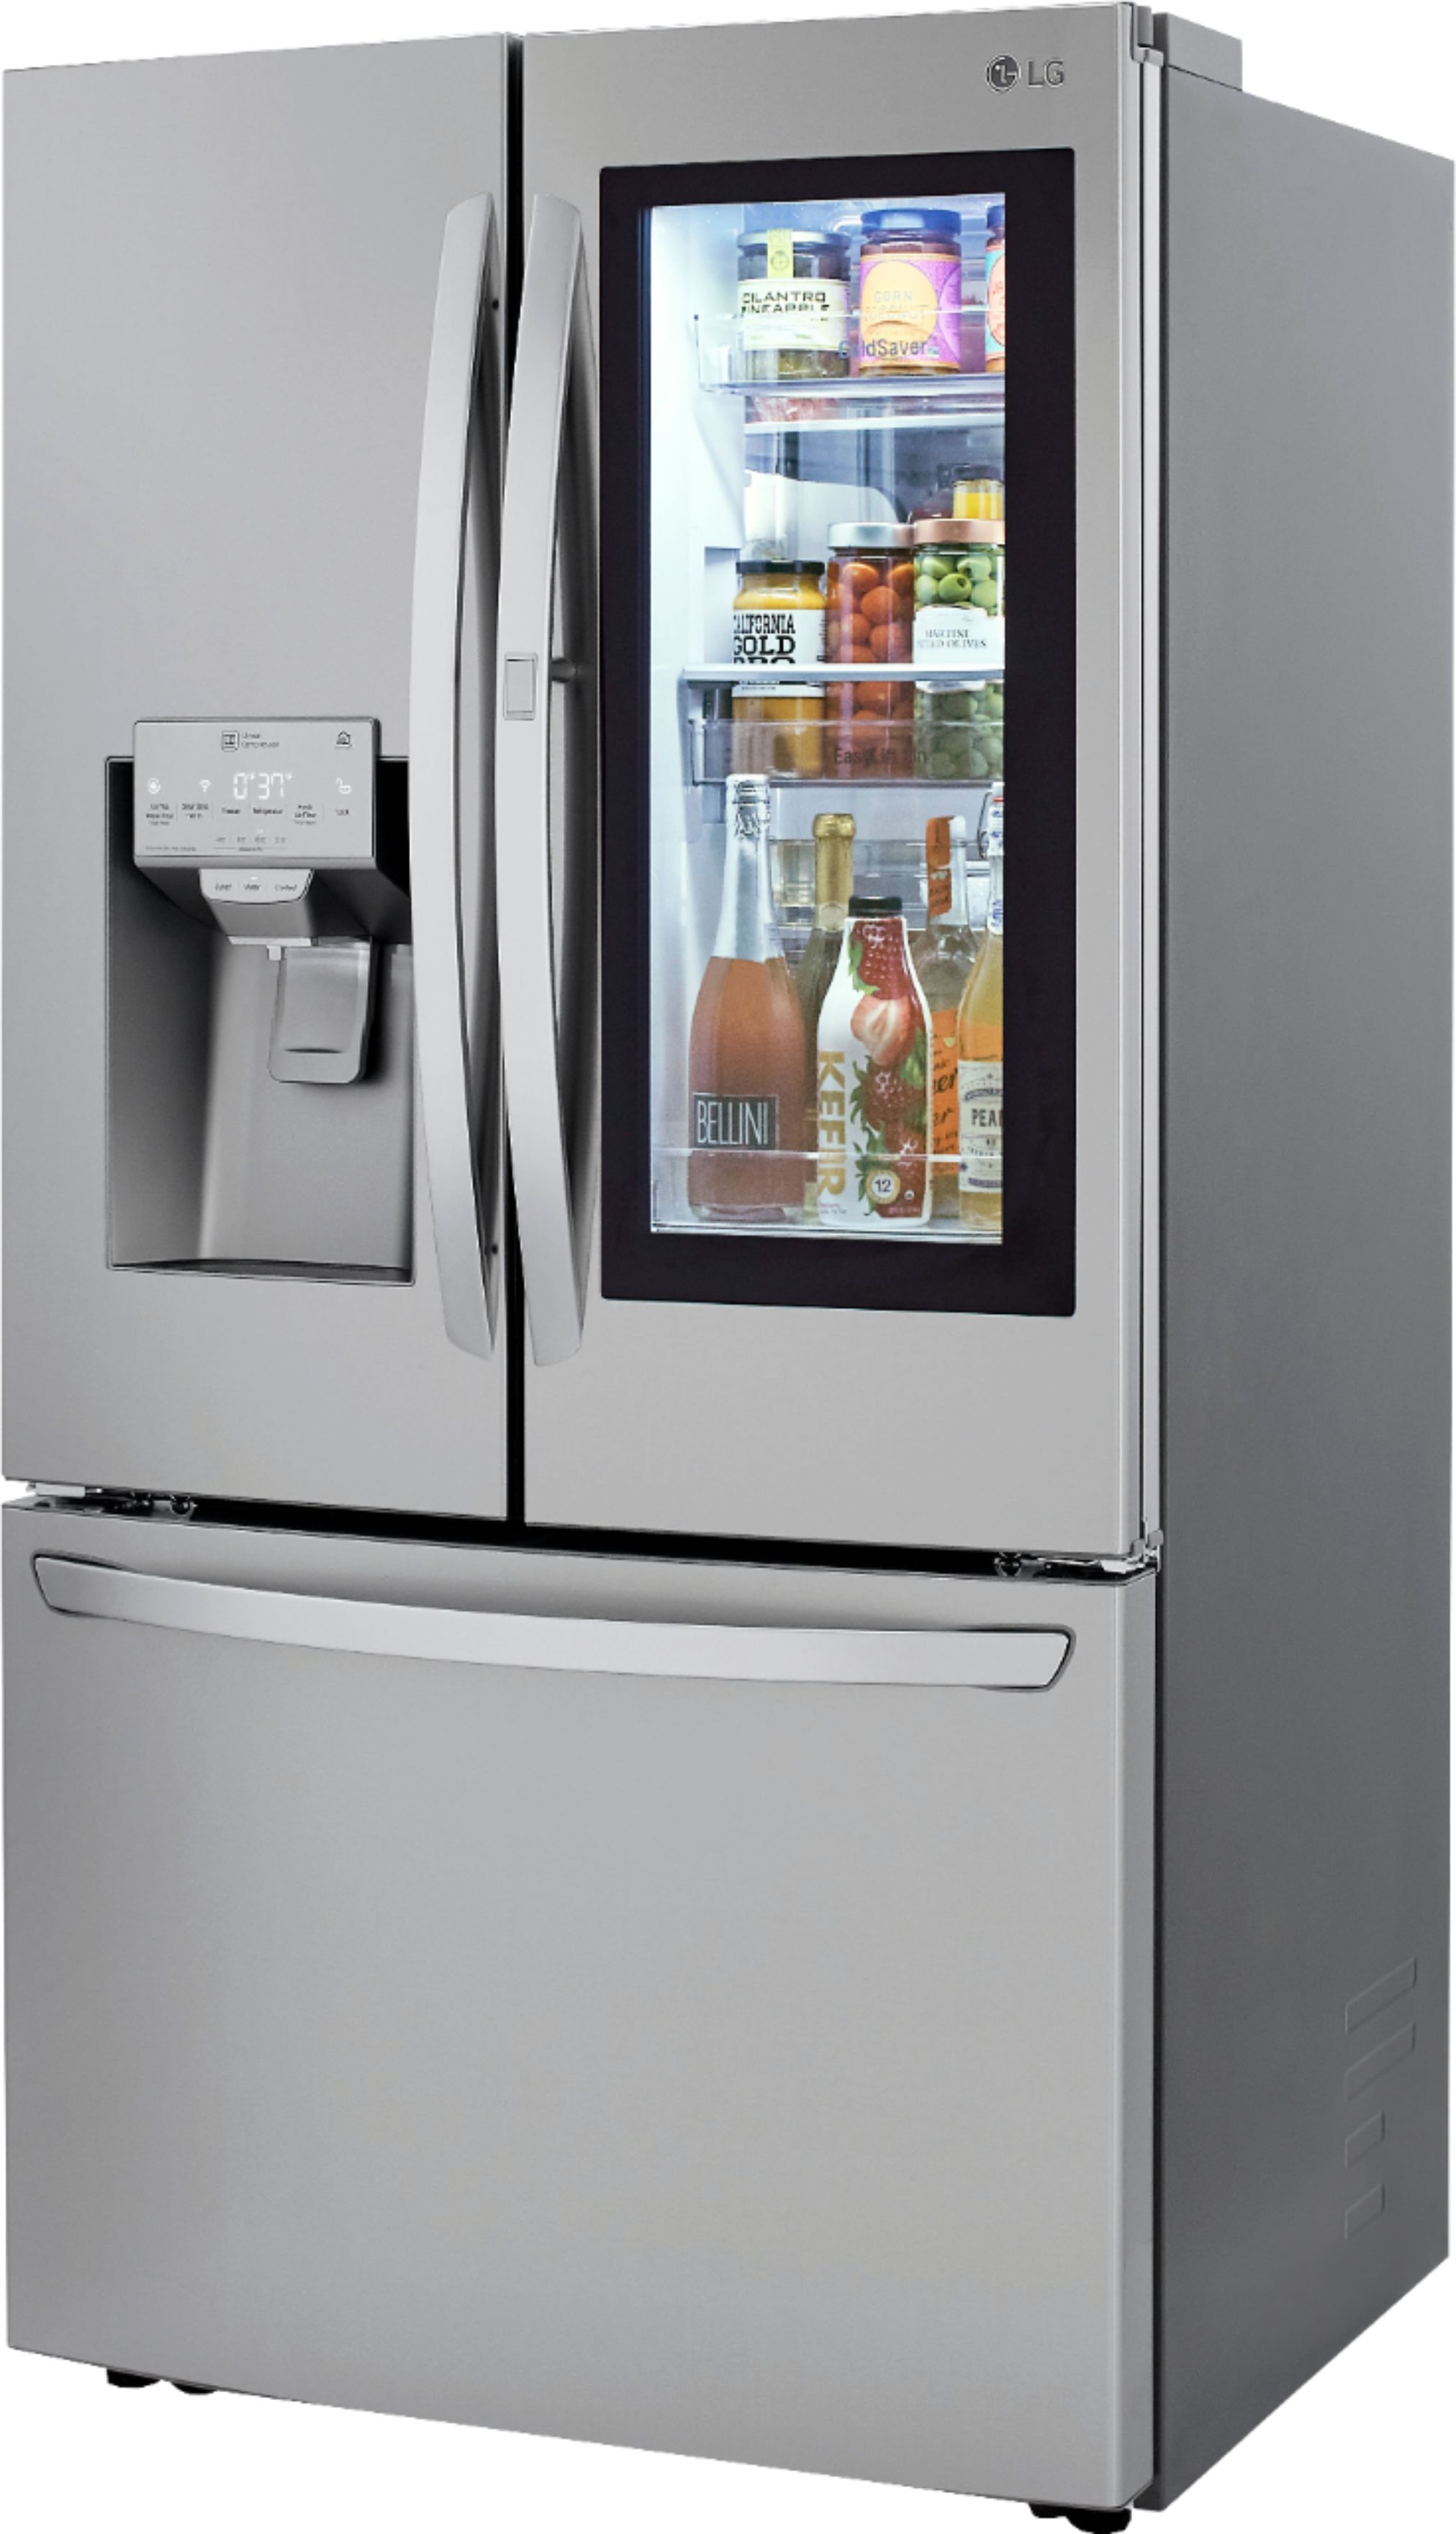 LG Smart Refrigerator With Craft Ice Review